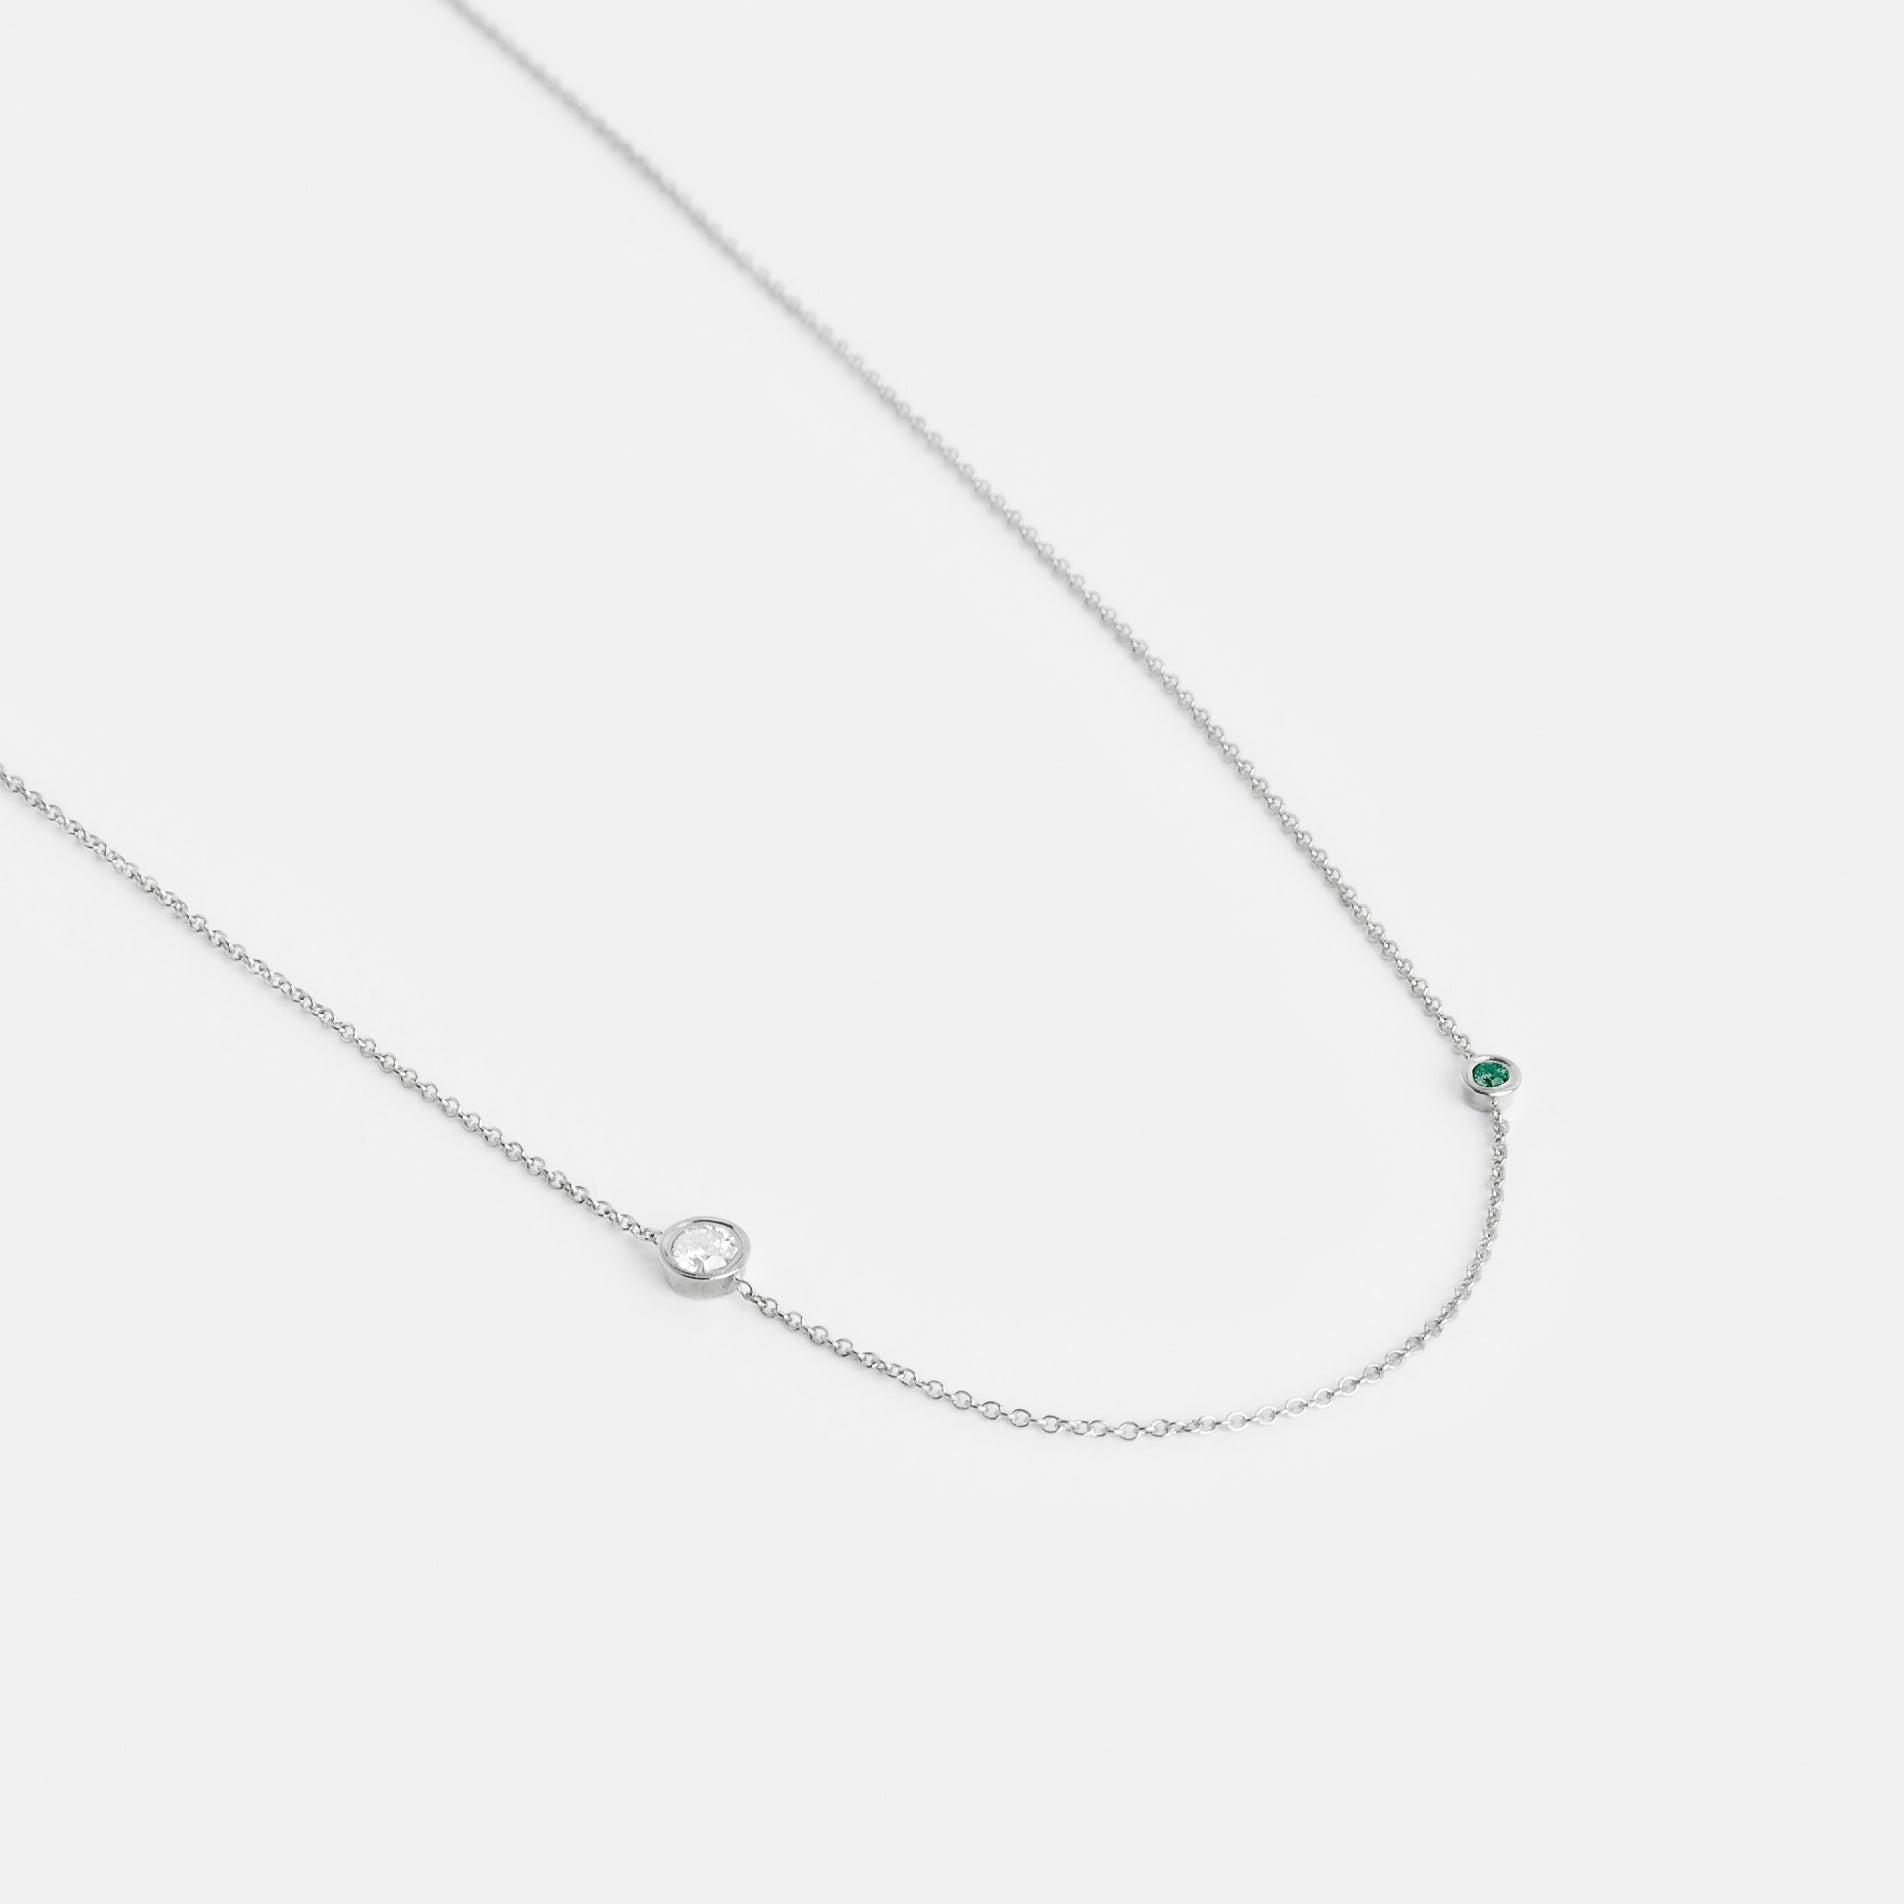 Iba Alternative Necklace in Sterling Silver set with White Diamond and Emerald By SHW Fine Jewelry NYC